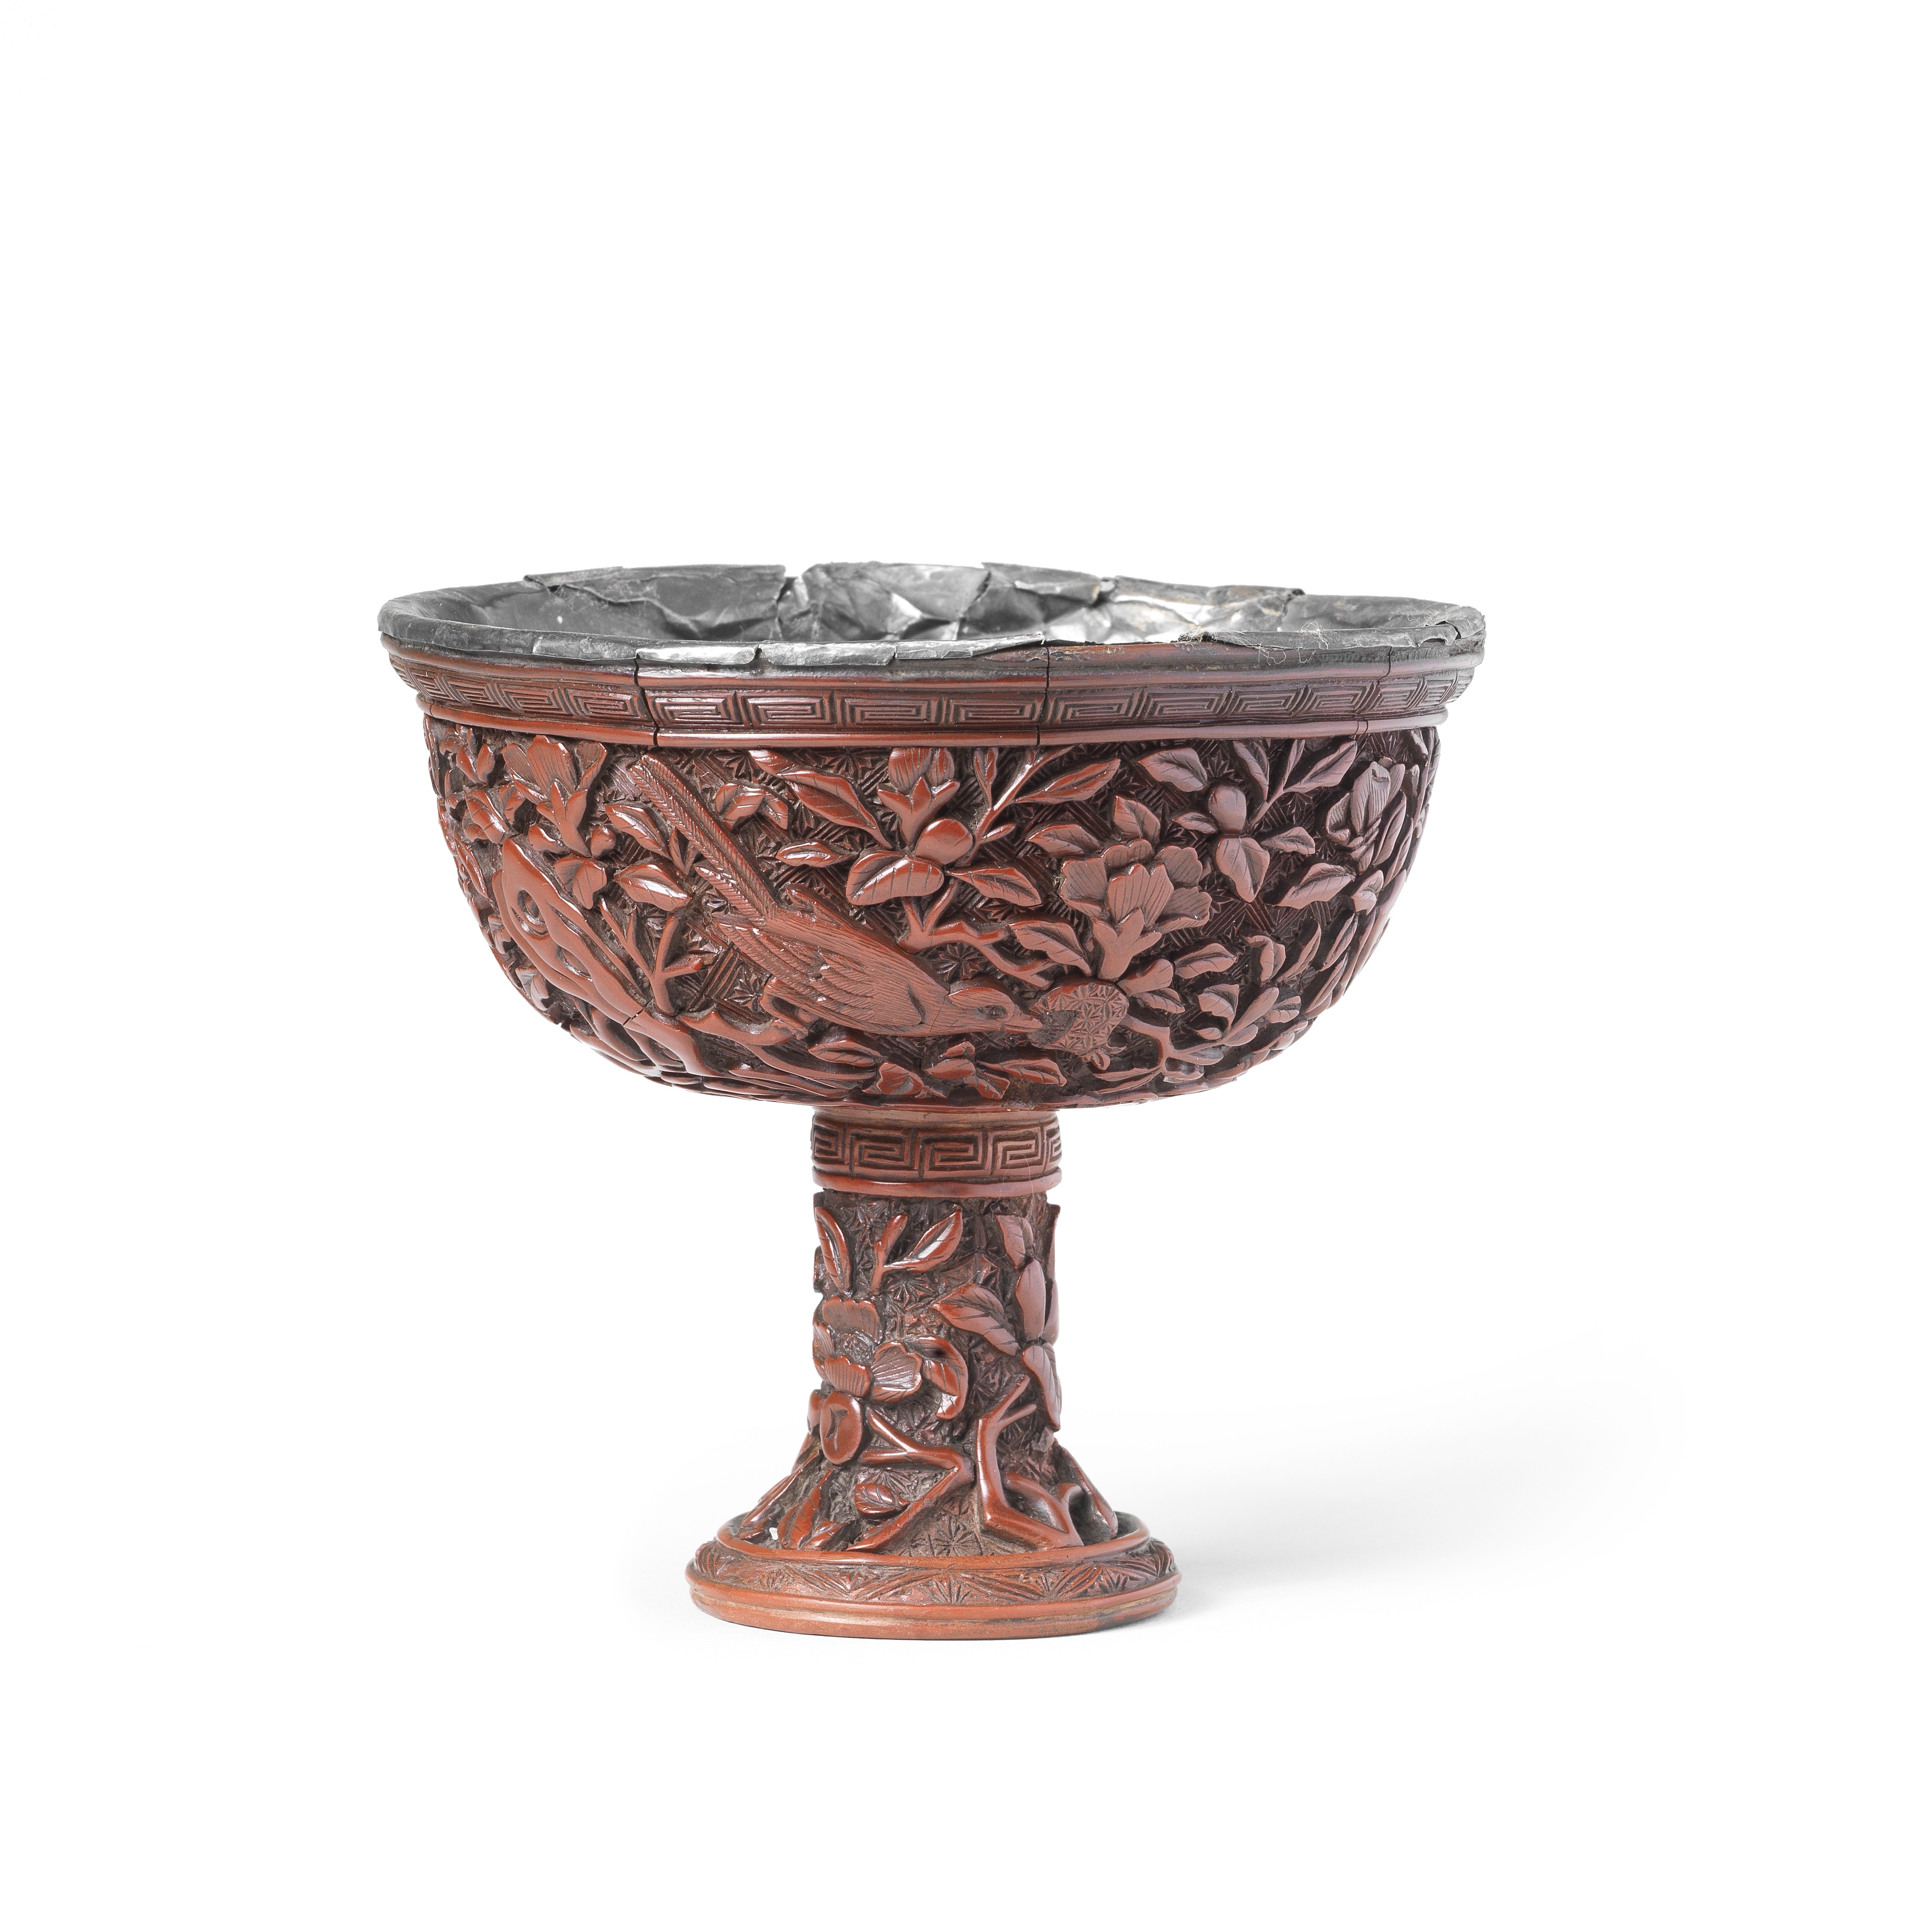 A CINNABAR LACQUER CARVED STEM CUP 16th century